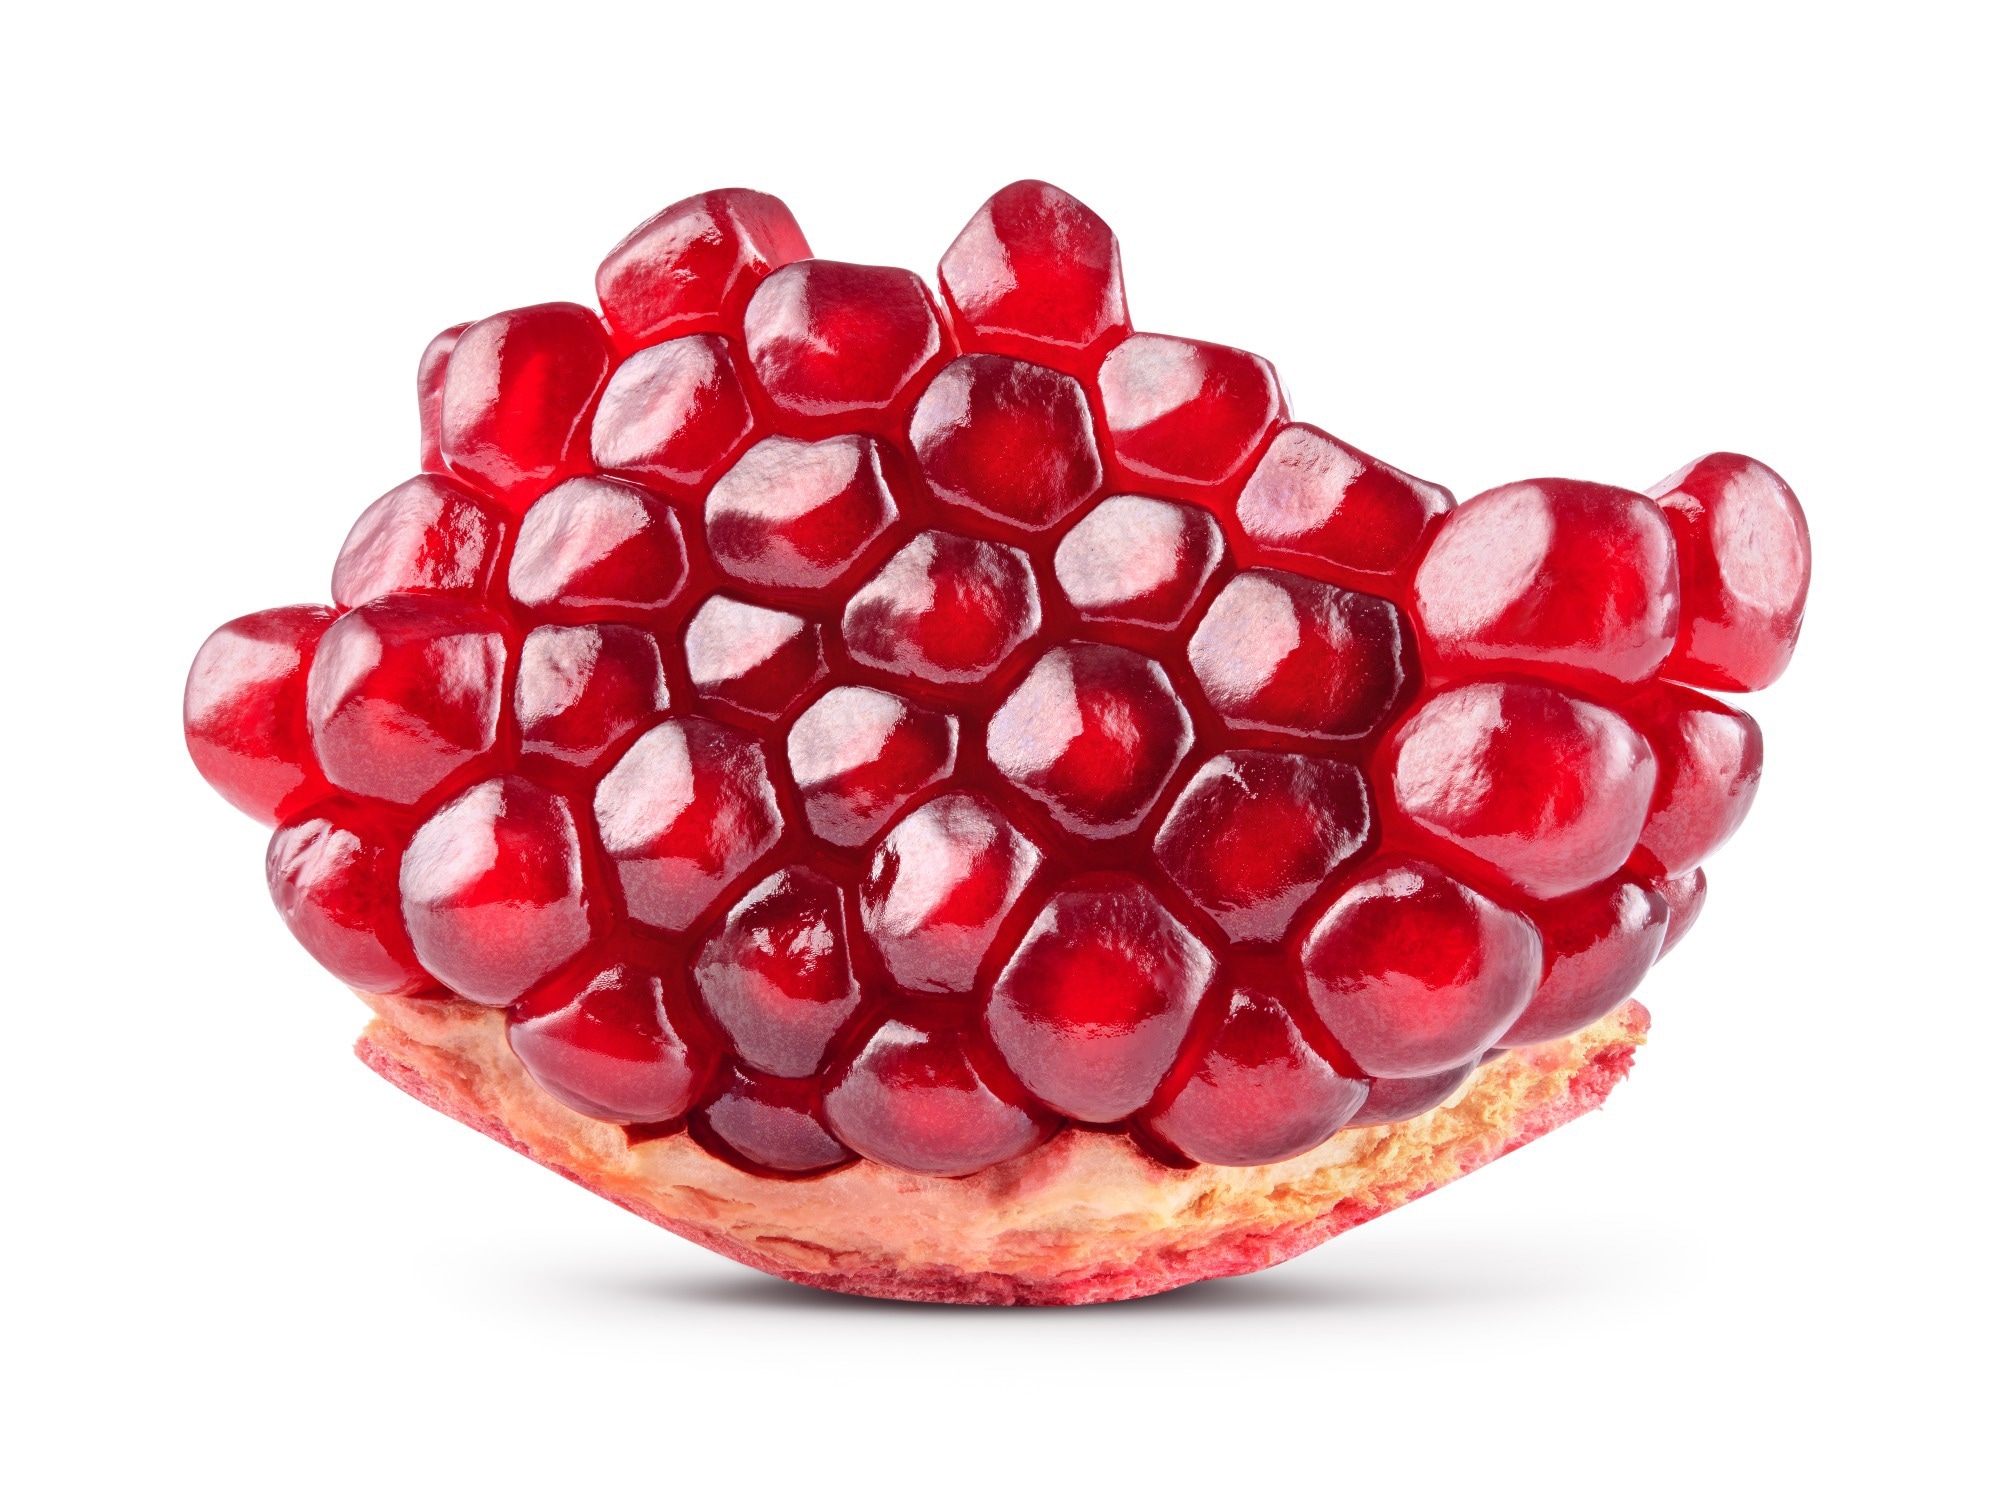 Study: Improved Cardiovascular Effects of a Novel Pomegranate Byproduct Extract Obtained through Hydrodynamic Cavitation. Image Credit: Tim UR/Shutterstock.com